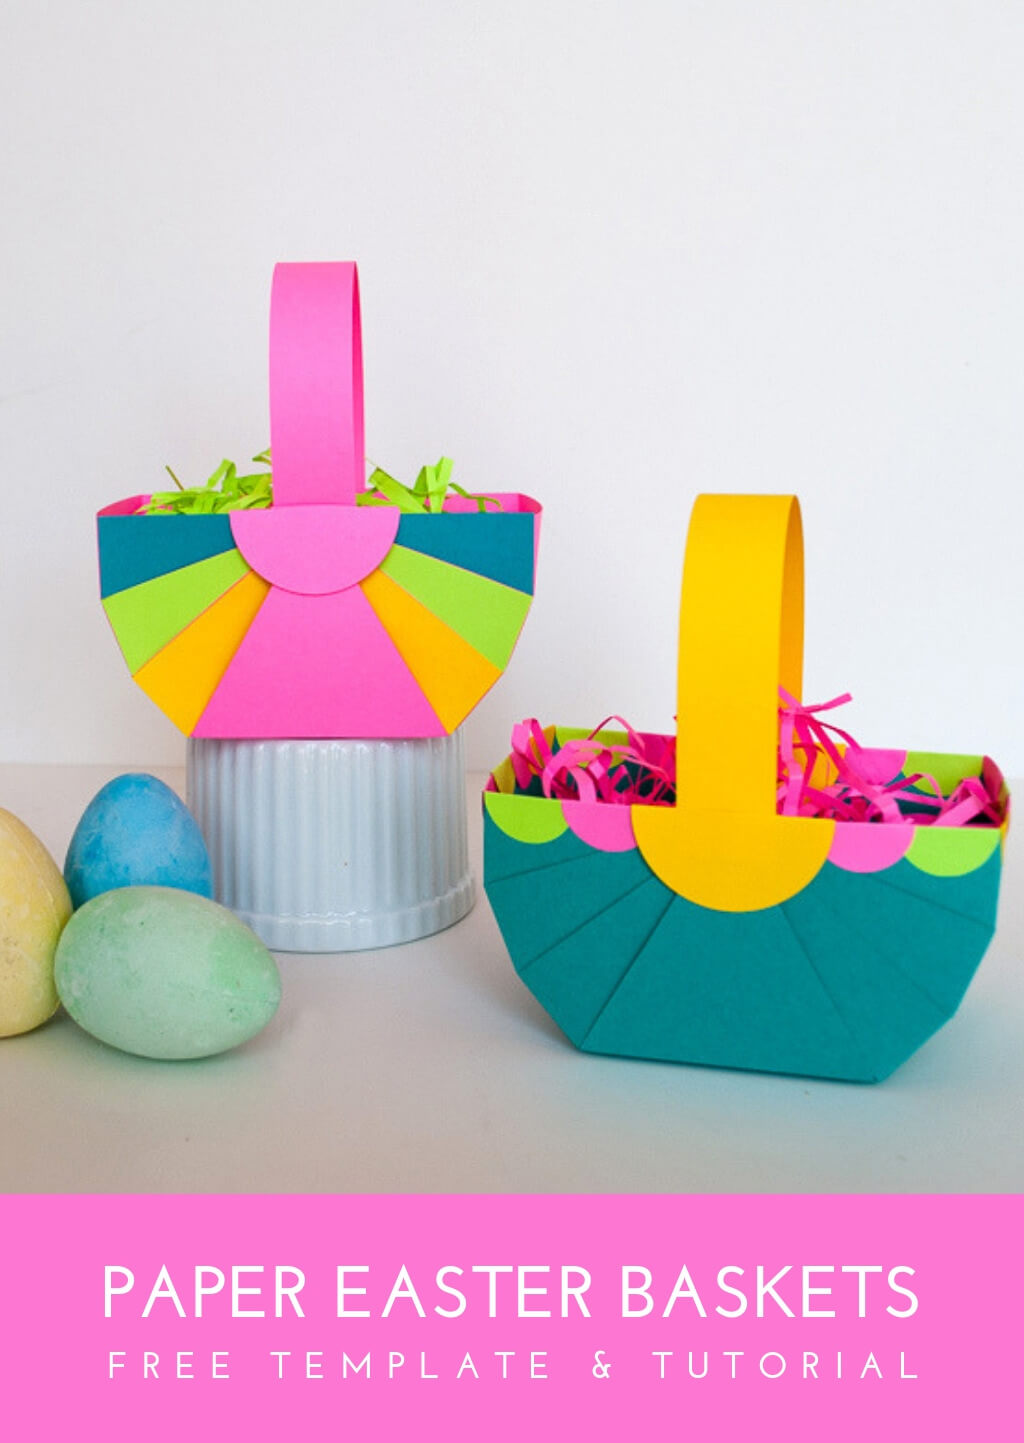 Pretty DIY Paper Easter Baskets template